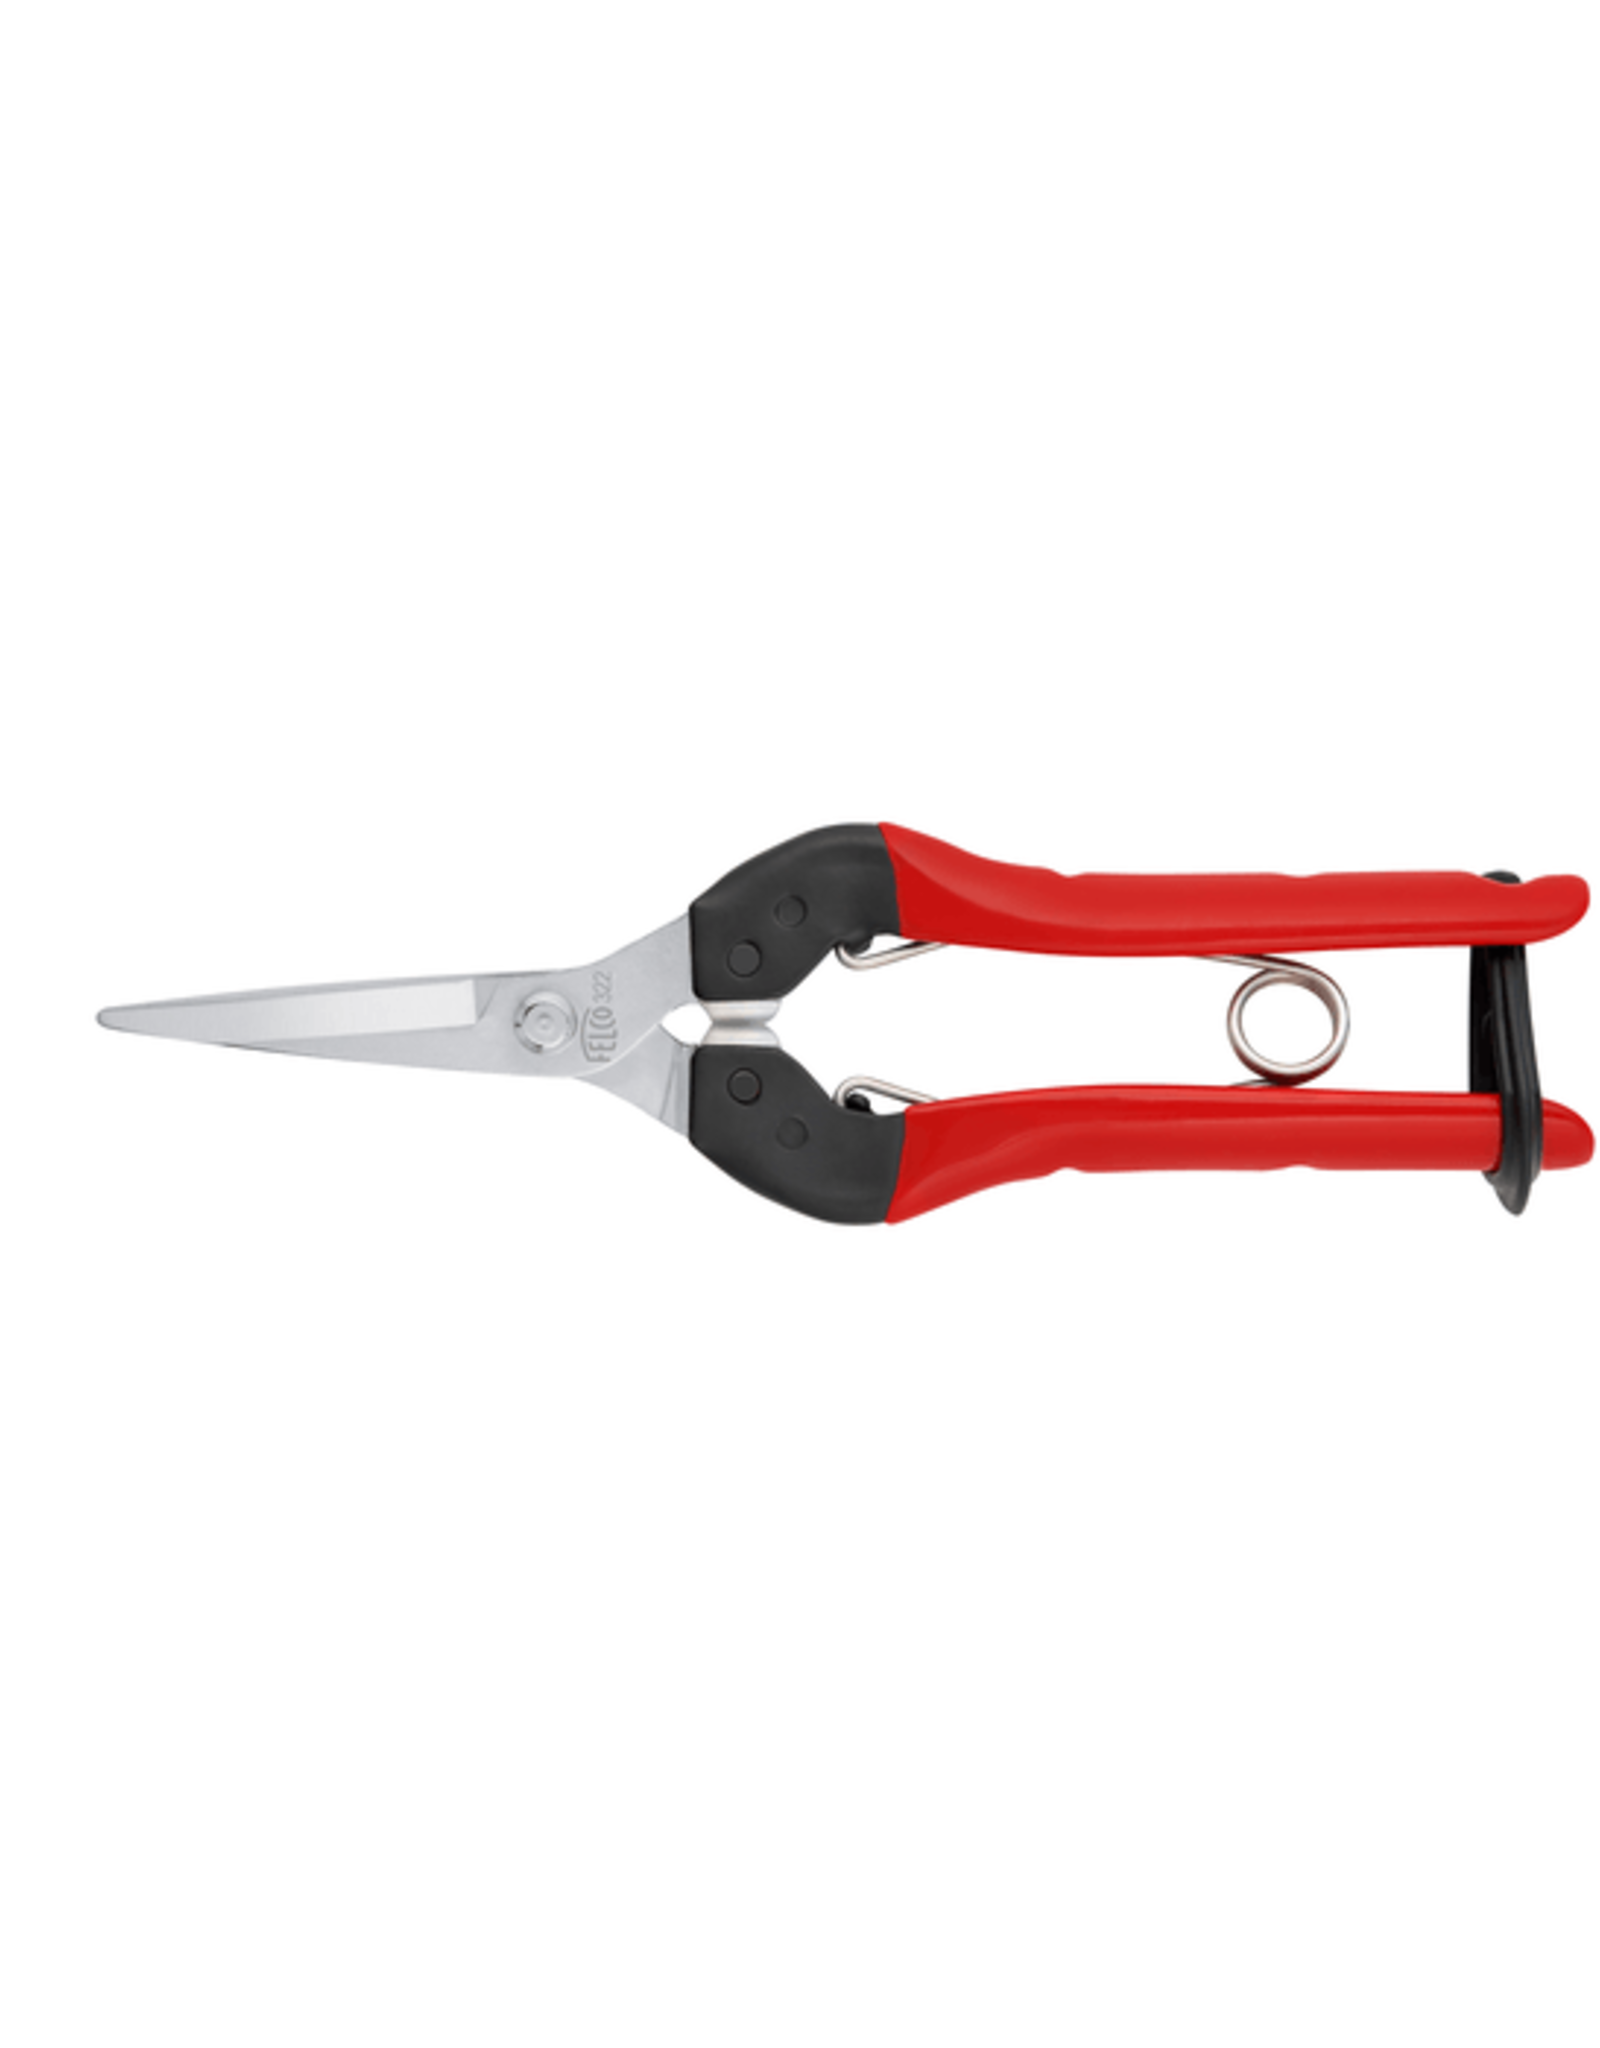 Felco 322 - Harvesting shears with steel handles, straight and chromed blade, 190mm